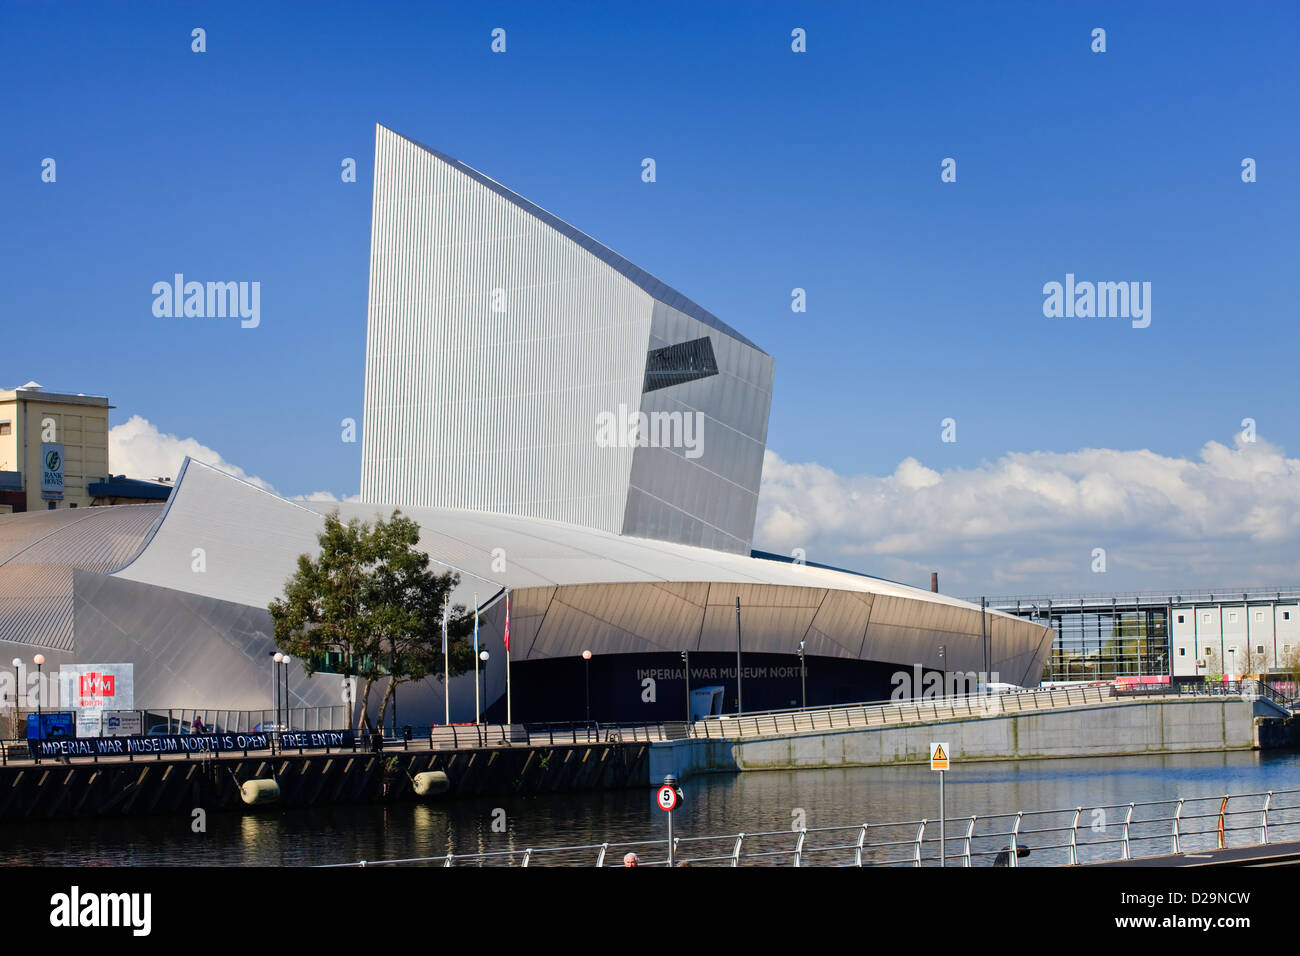 Imperial War Museum North Greater Manchester Salford Quays Lancashire England Banque D'Images